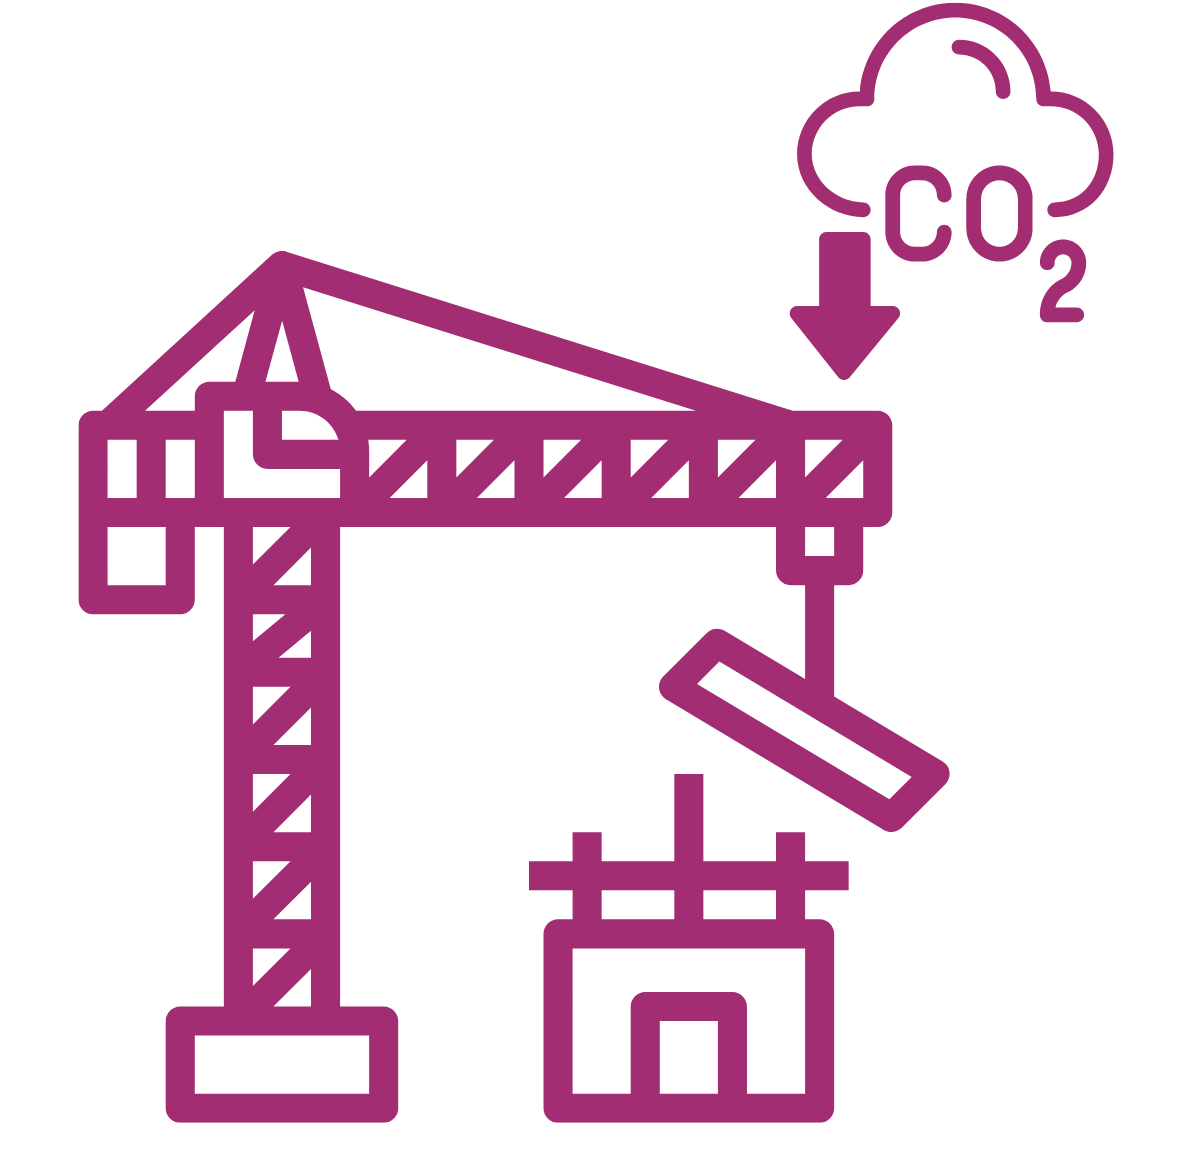 Graphic icon that represents construction of a building. An icon with a cloud that has "CO2" written in it with an arrow pointing down toward the ground hovers above the construction icon.